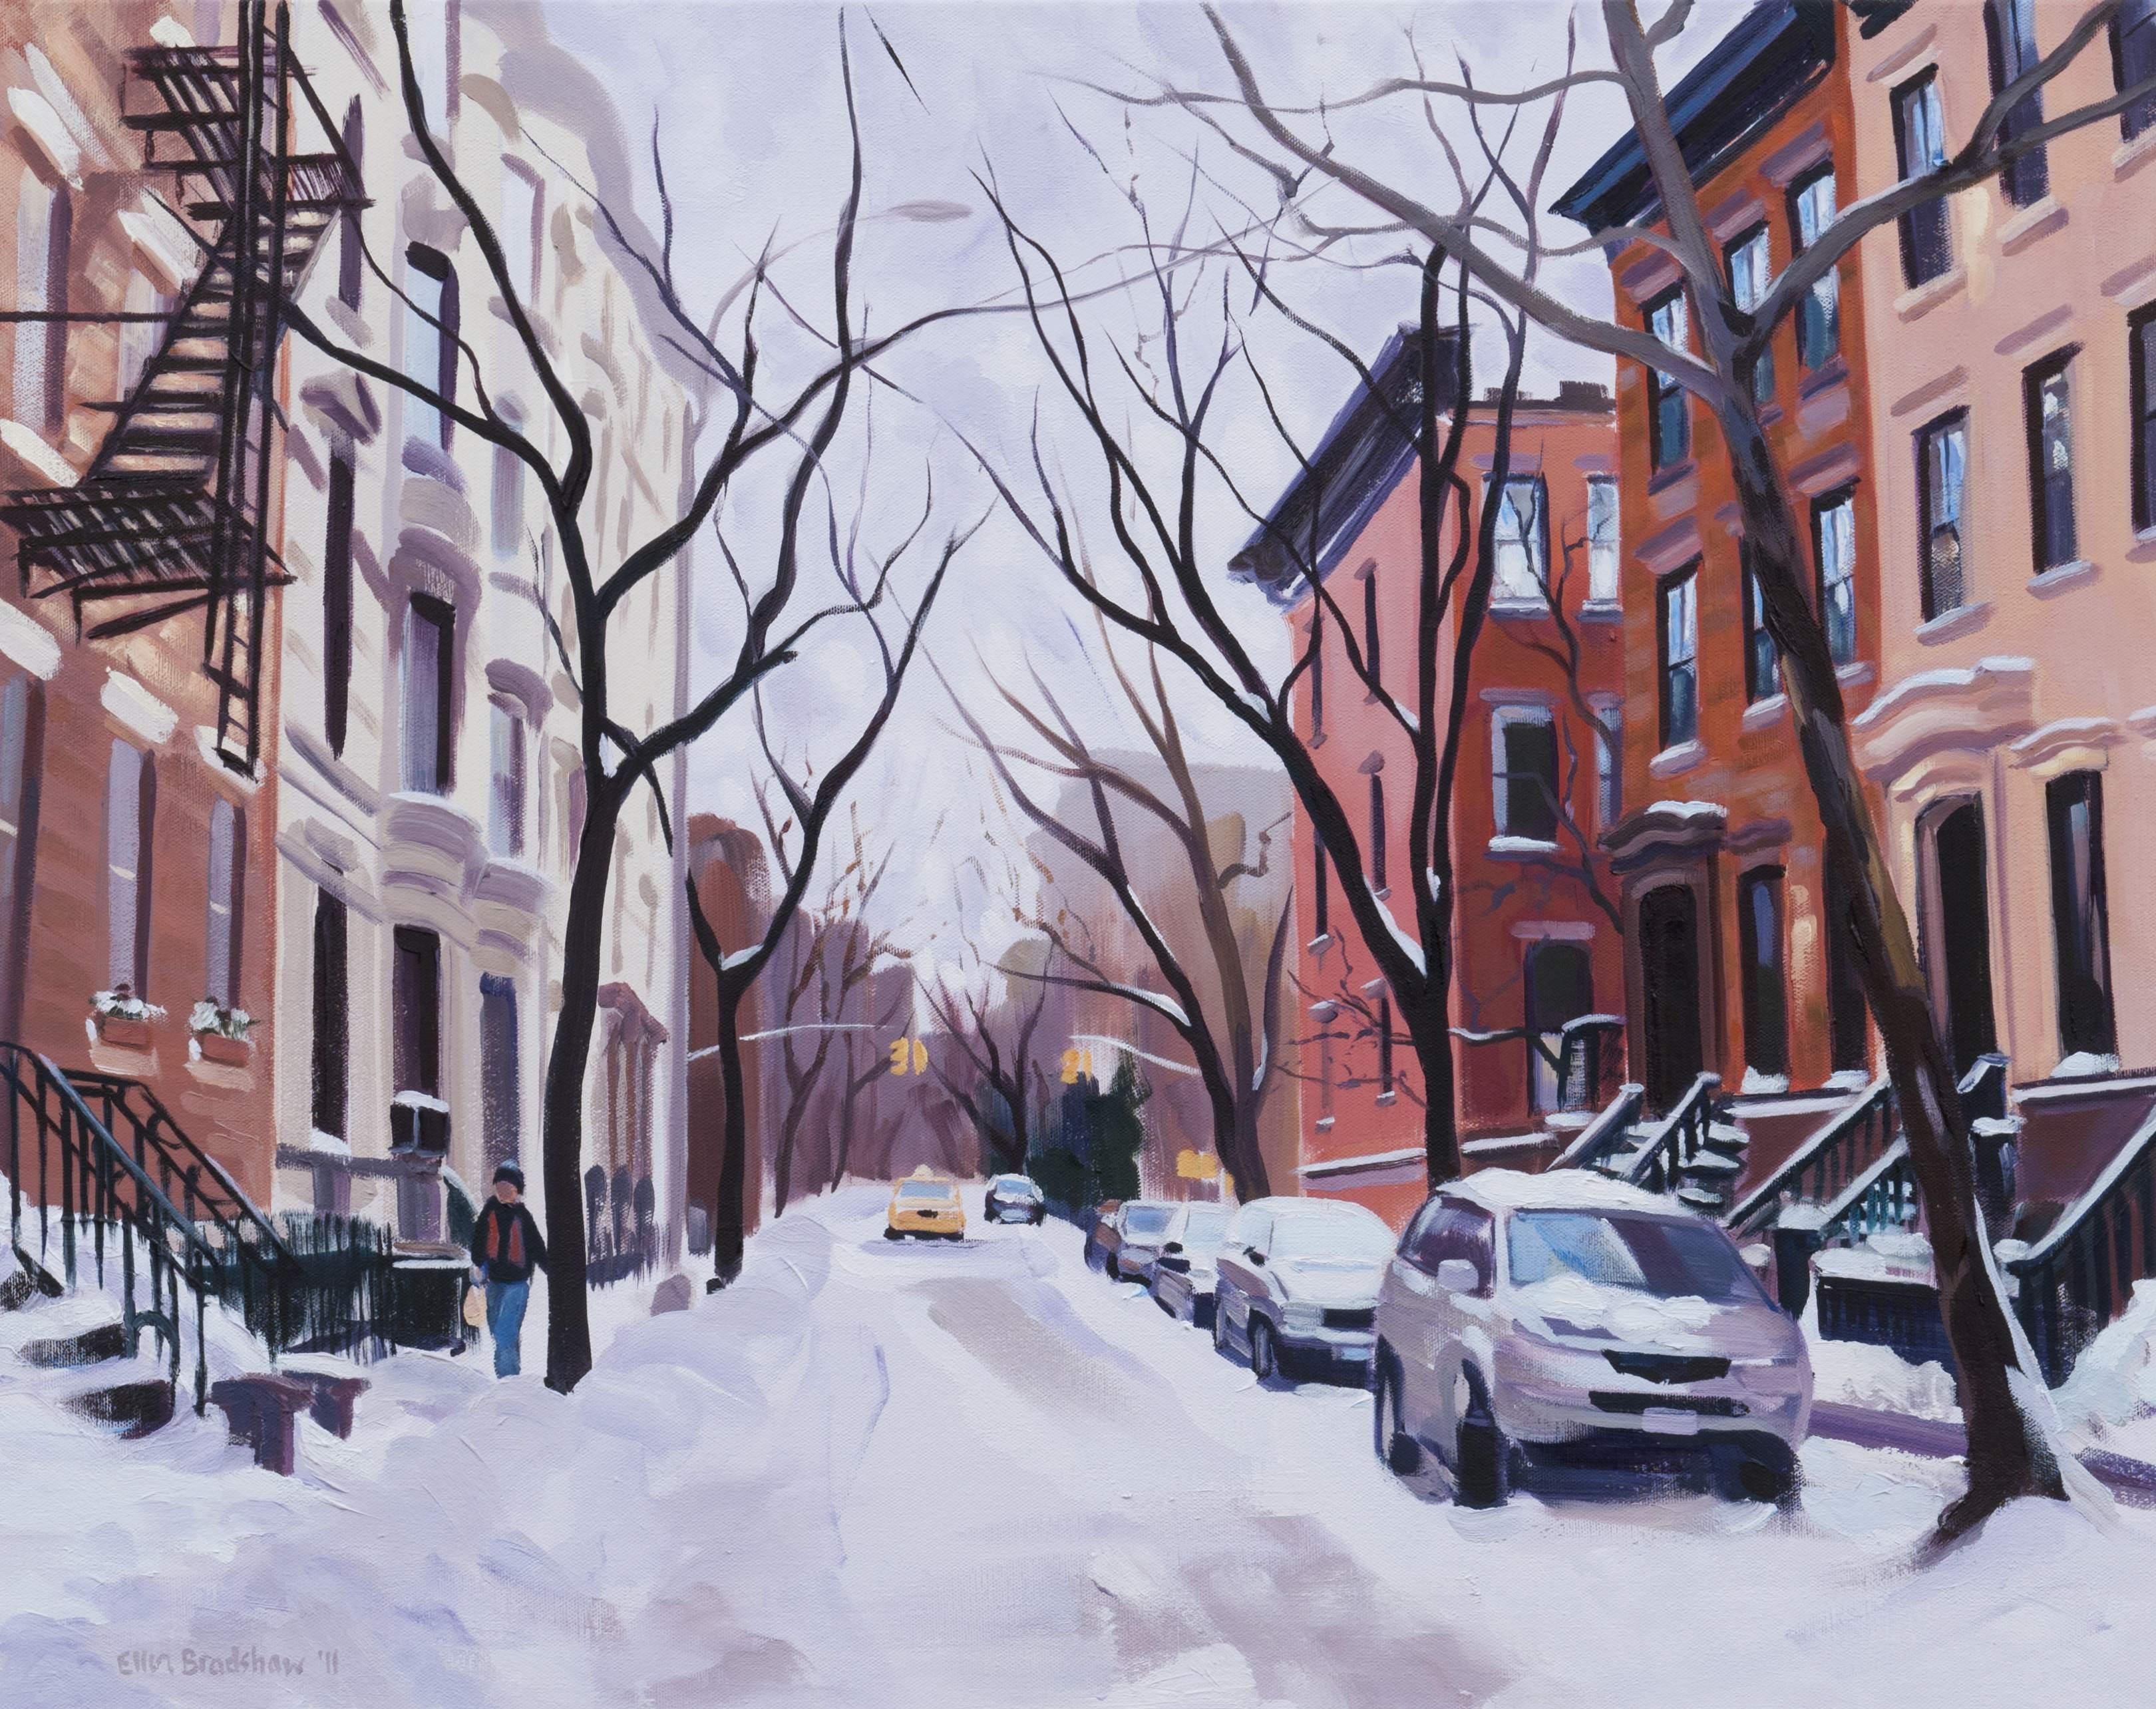 This is my favorite street view in the West Village where I have my studio, I have painted it in every season! The quiet charming neighborhood street is so peaceful in the snow against the beautiful old architecture.  :: Painting :: Realism :: This